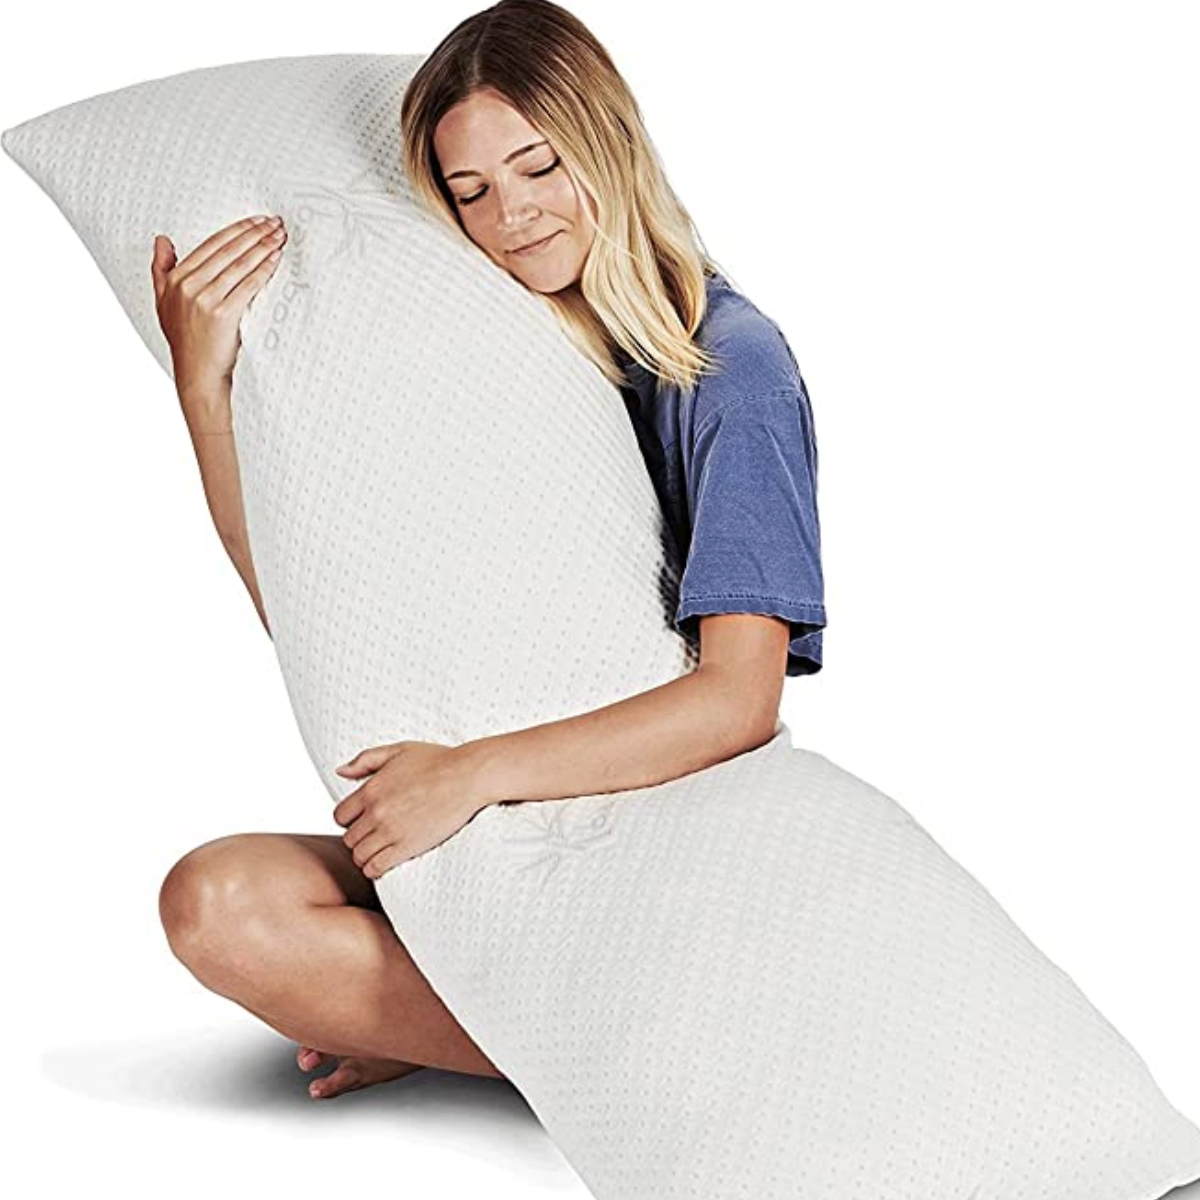 Simba cooling body pillow review: This pillow transformed our sleep